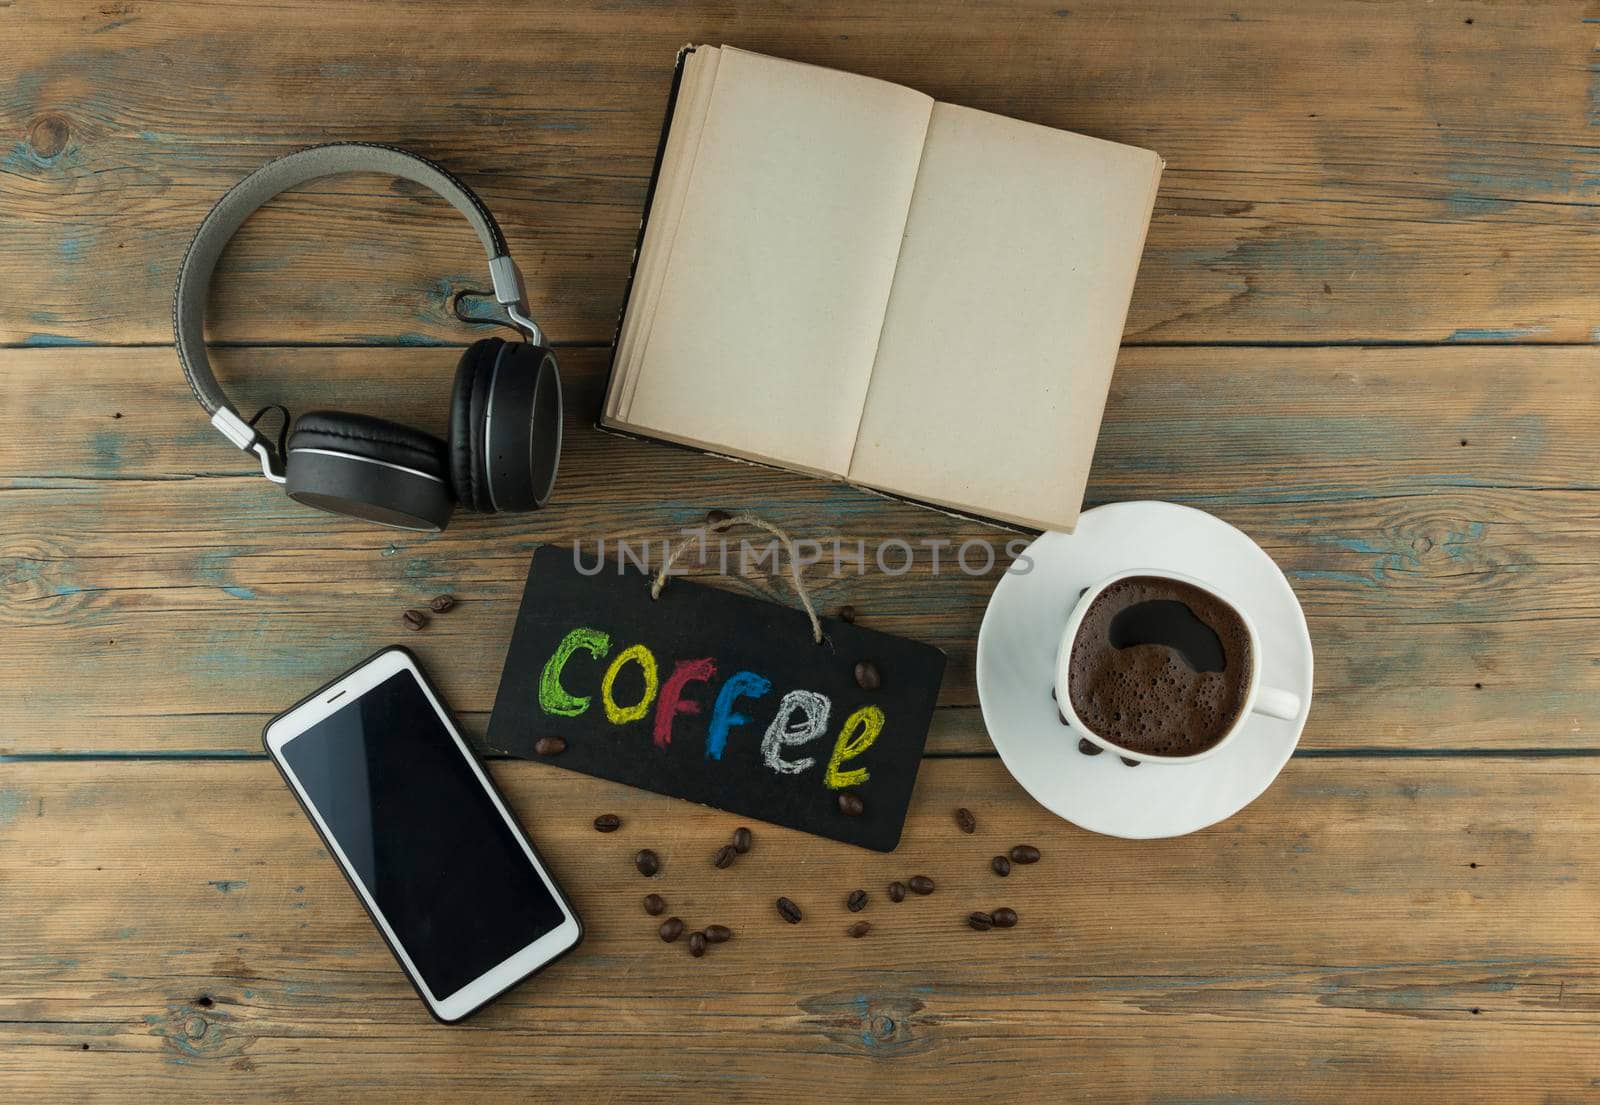 A cup of coffee, headphone, open book and a board with the inscription "coffee" written in a colorful alphabet. Coffee break, the concept of waking up in the morning. Top view